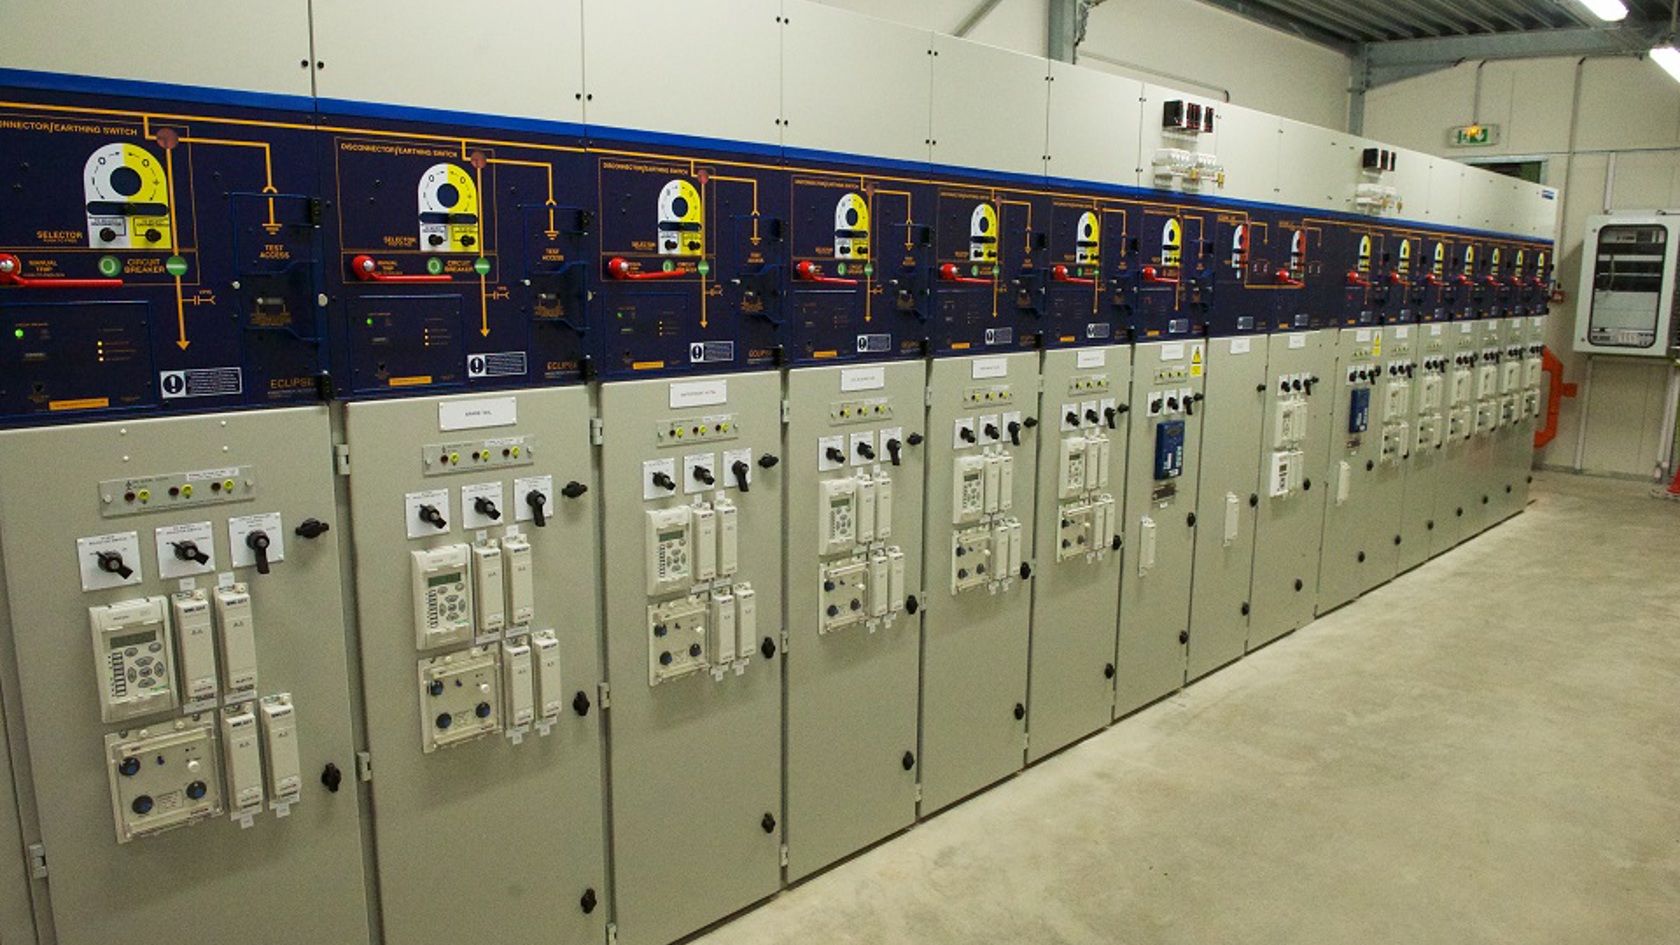 St Helier substation control panels